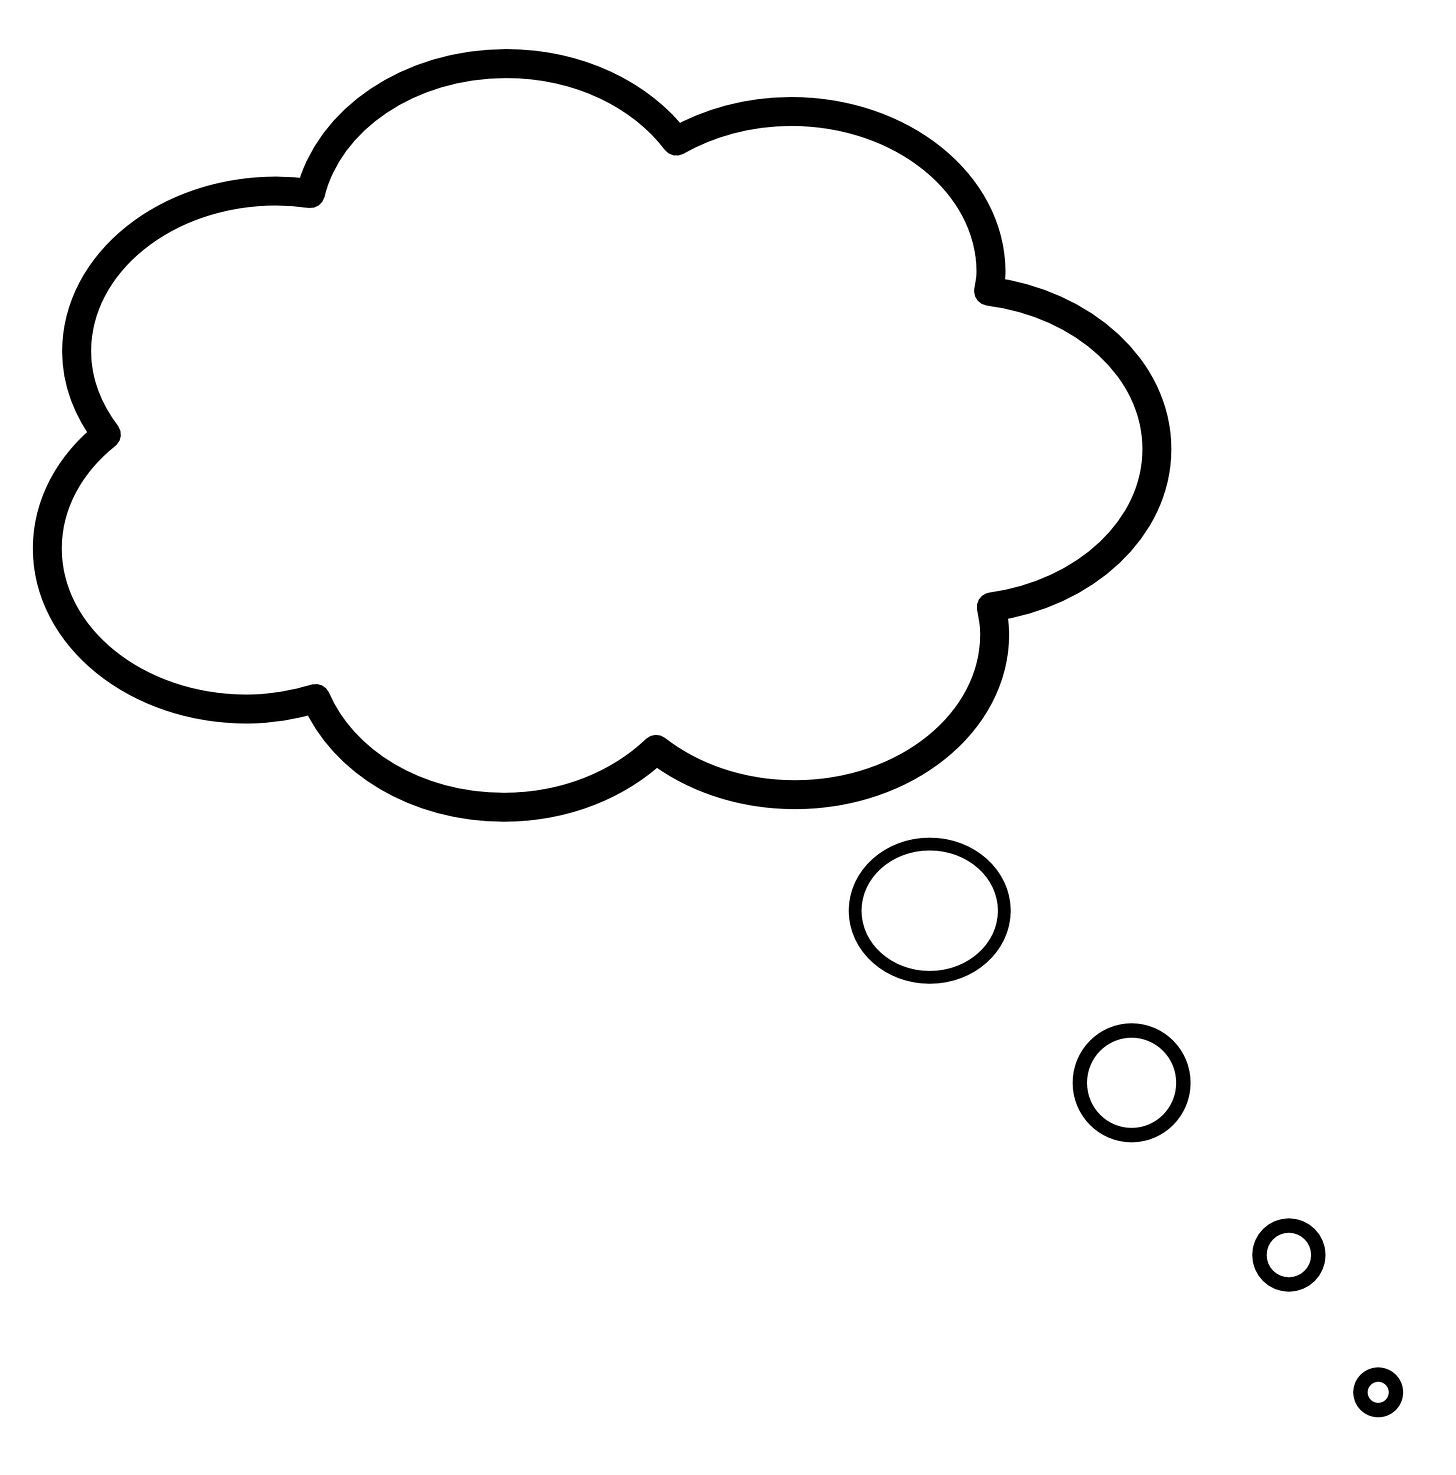 thinking speech bubble png
